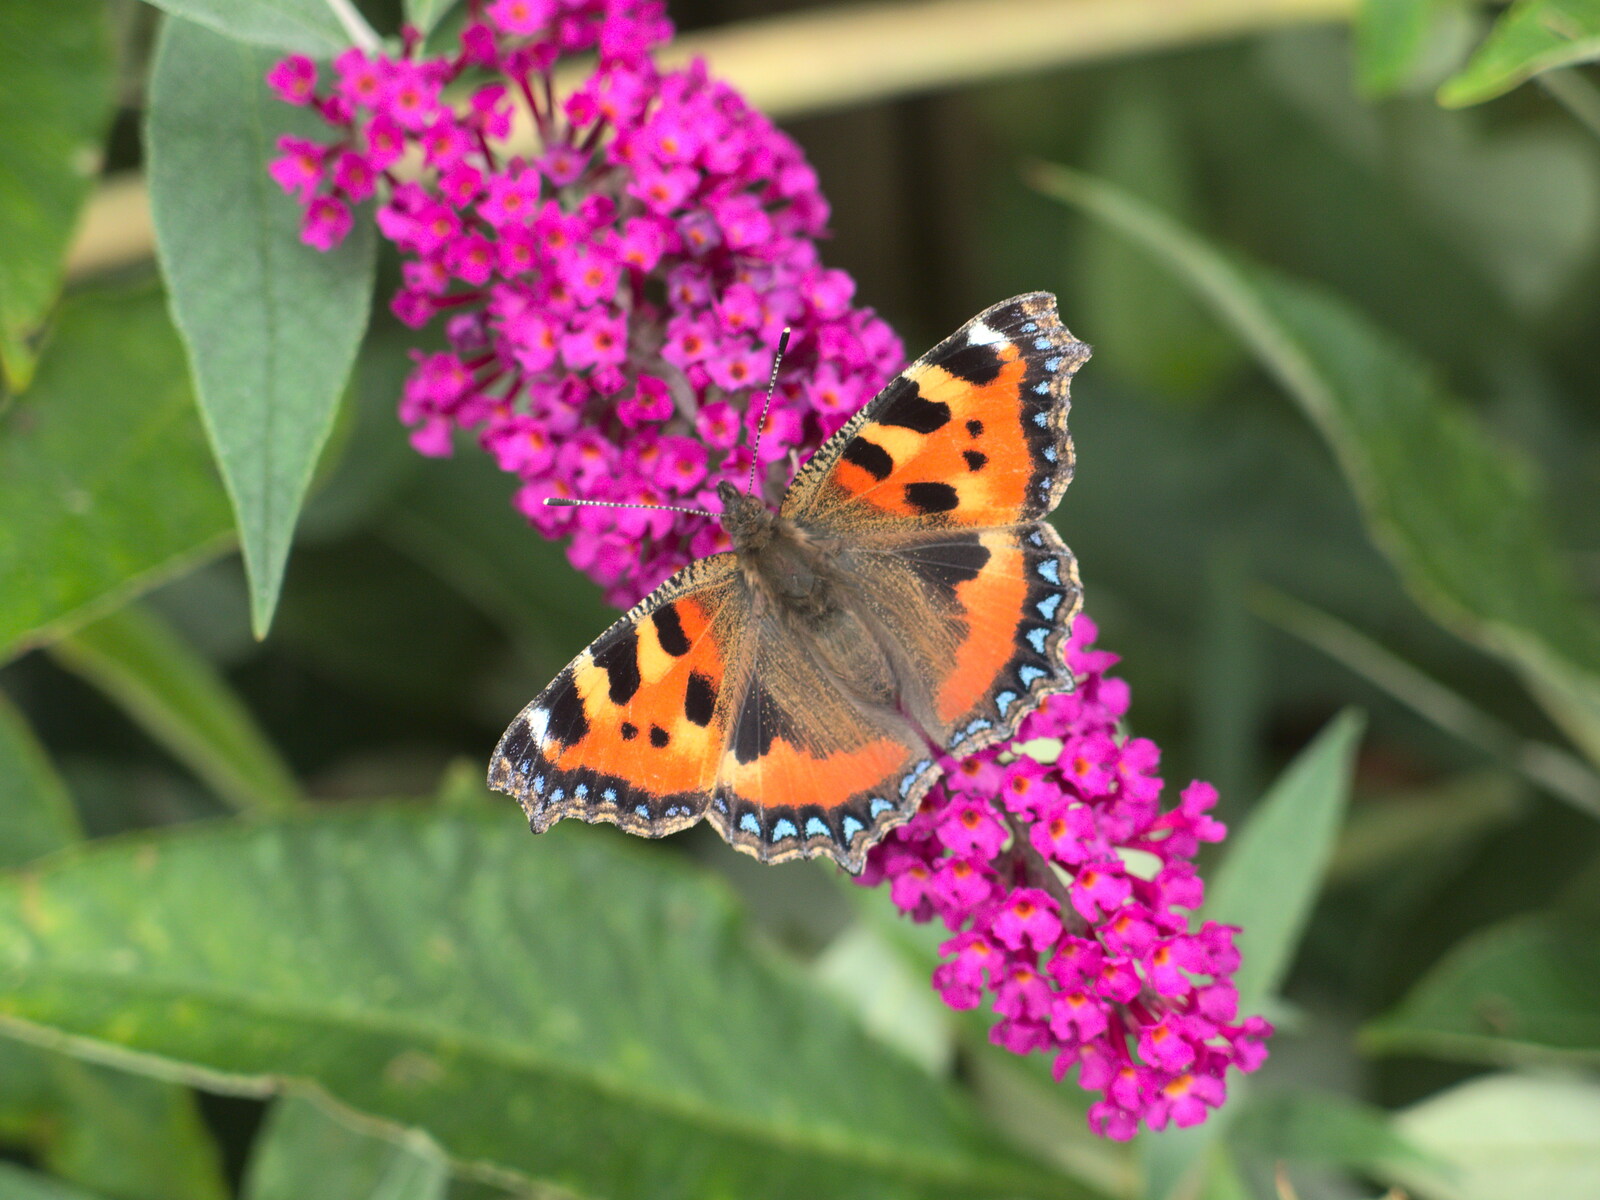 A Red Admiral butterfly from The BSCC at Harleston, and a Visit From Cambridge, Brome, Suffolk - 31st July 2014